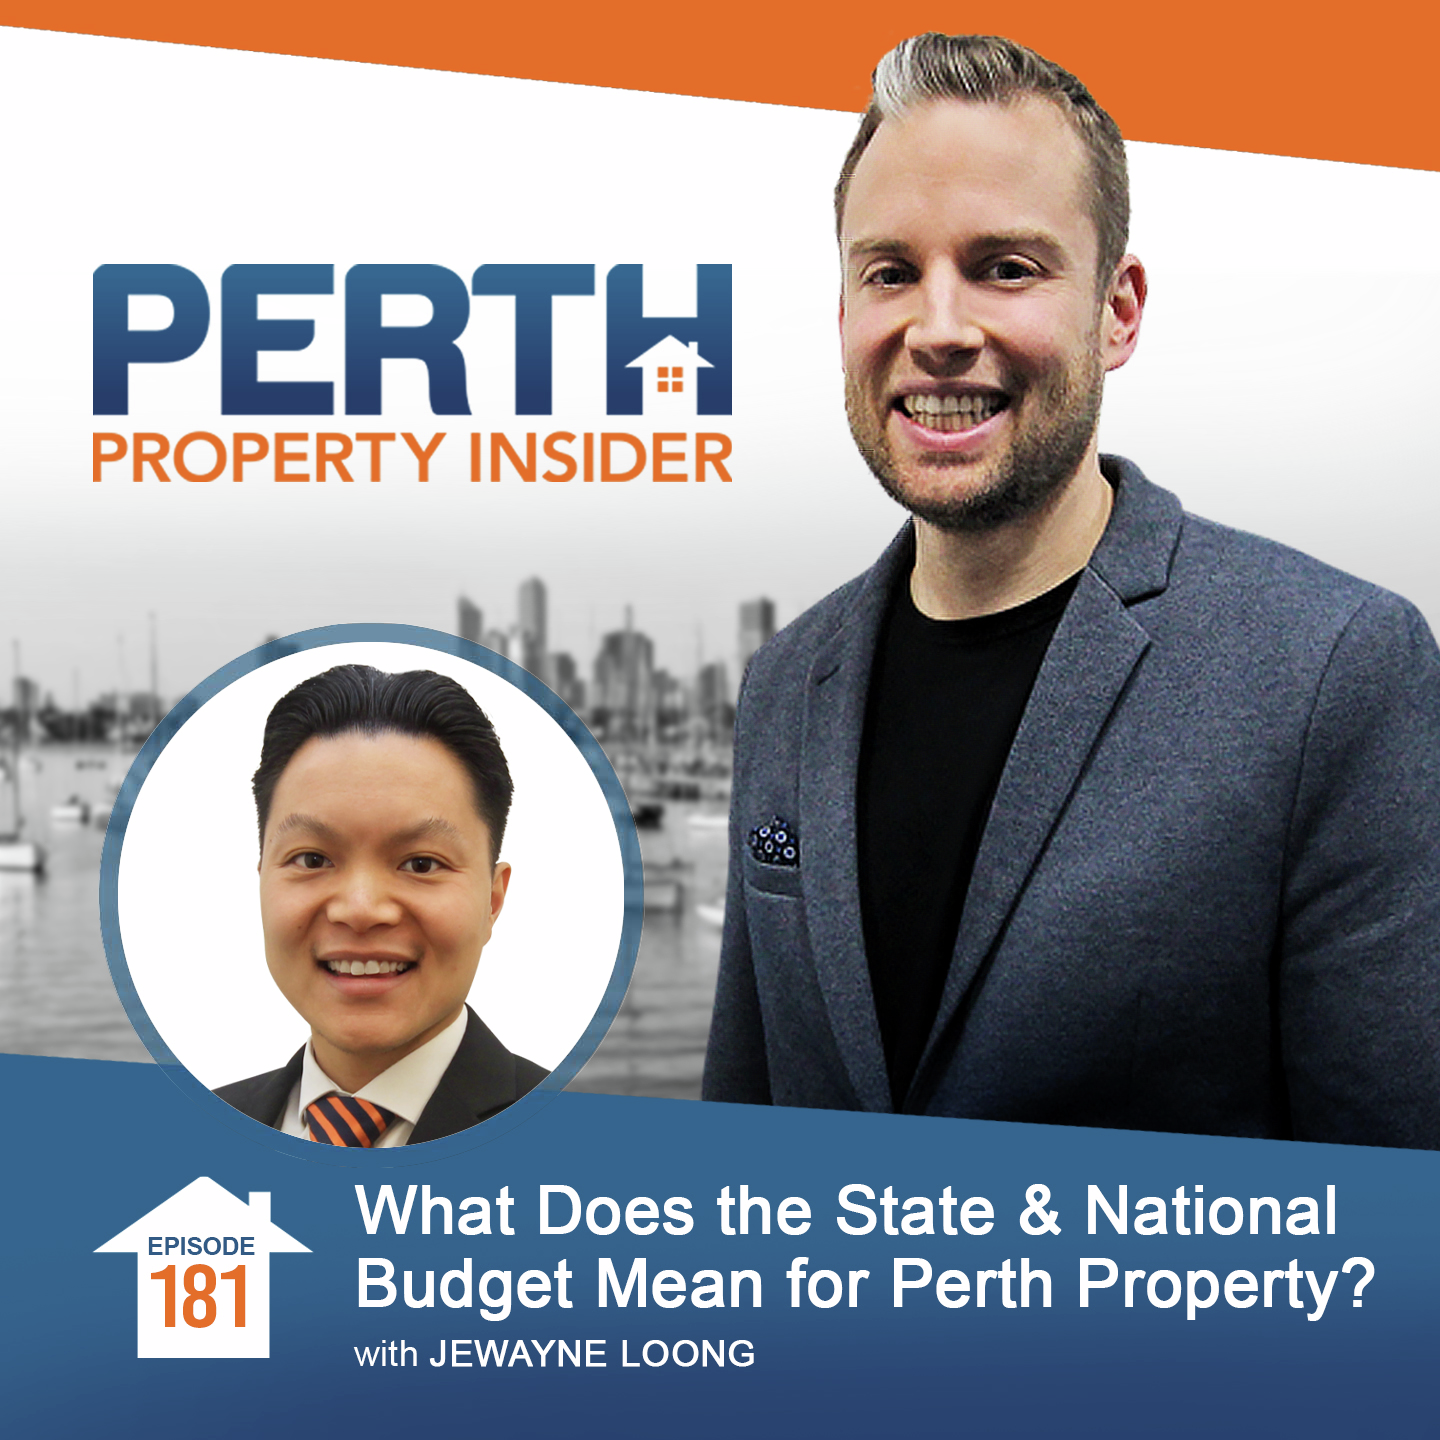 What Does the State & National Budget Mean for Perth Property?